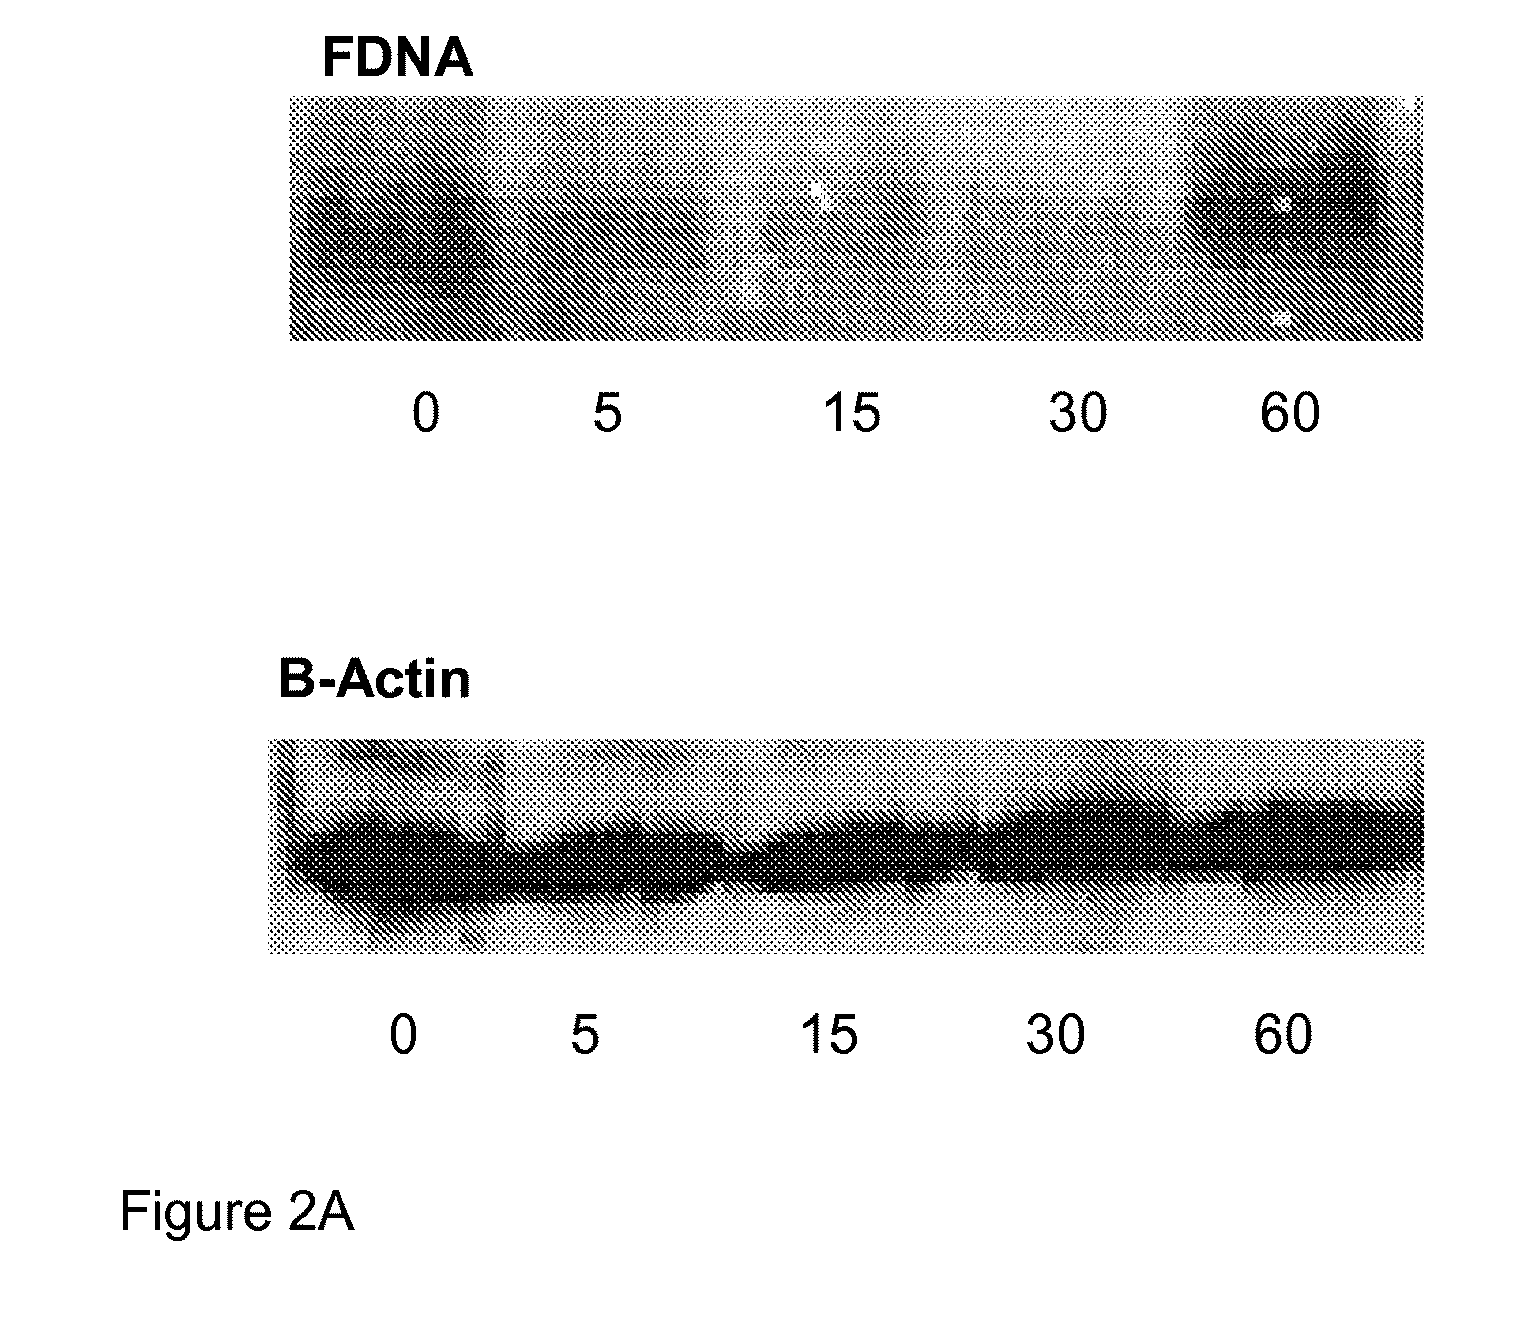 Treatment of preterm labor with toll-like receptor 9 antagonists